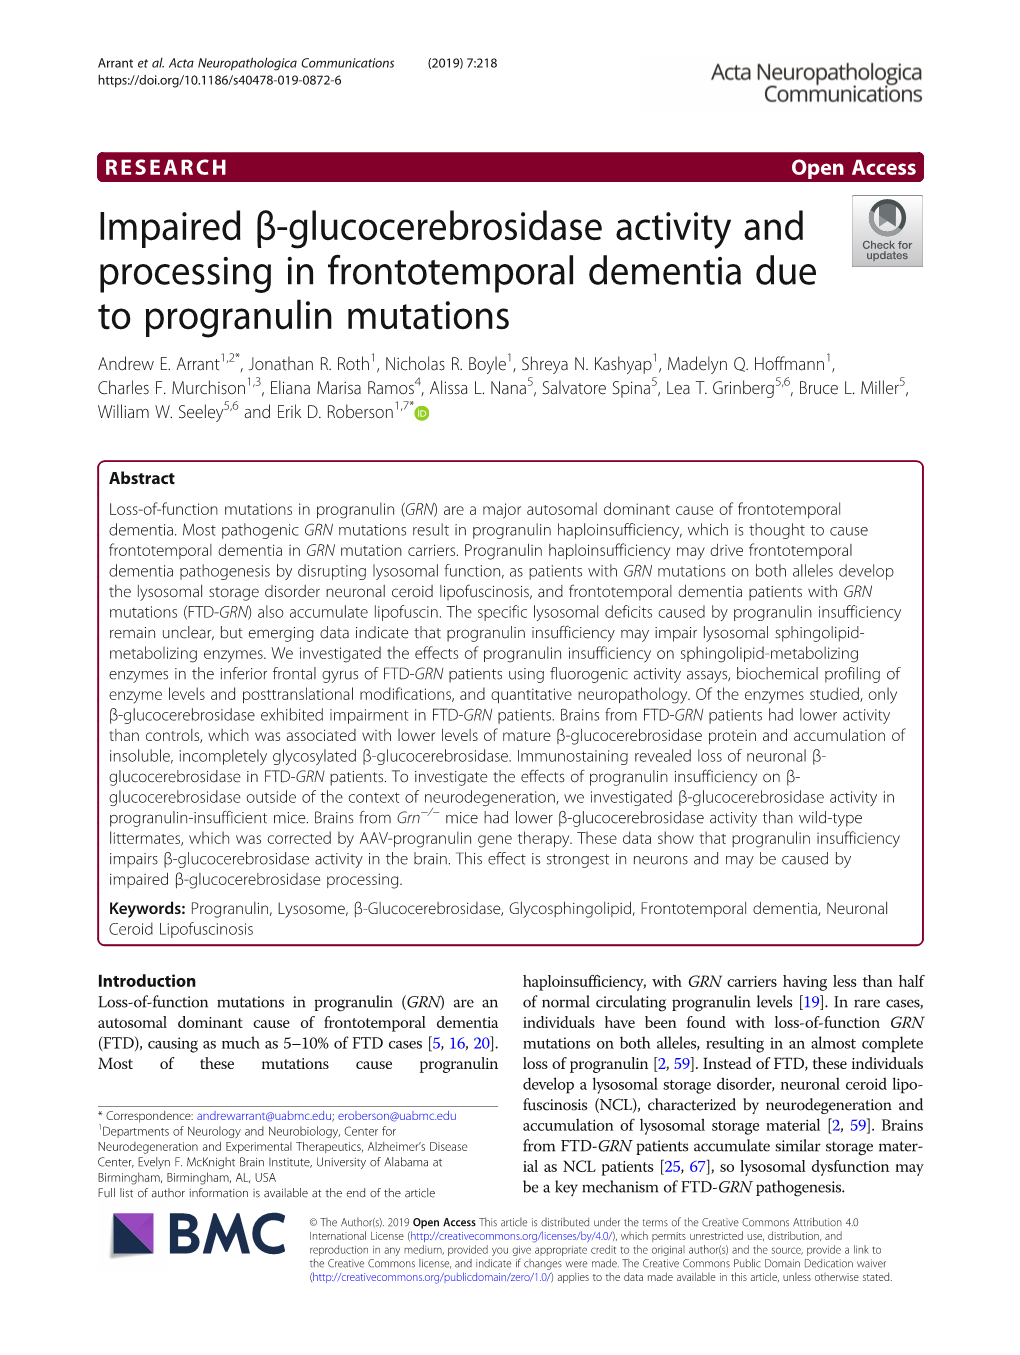 Impaired Β-Glucocerebrosidase Activity and Processing in Frontotemporal Dementia Due to Progranulin Mutations Andrew E